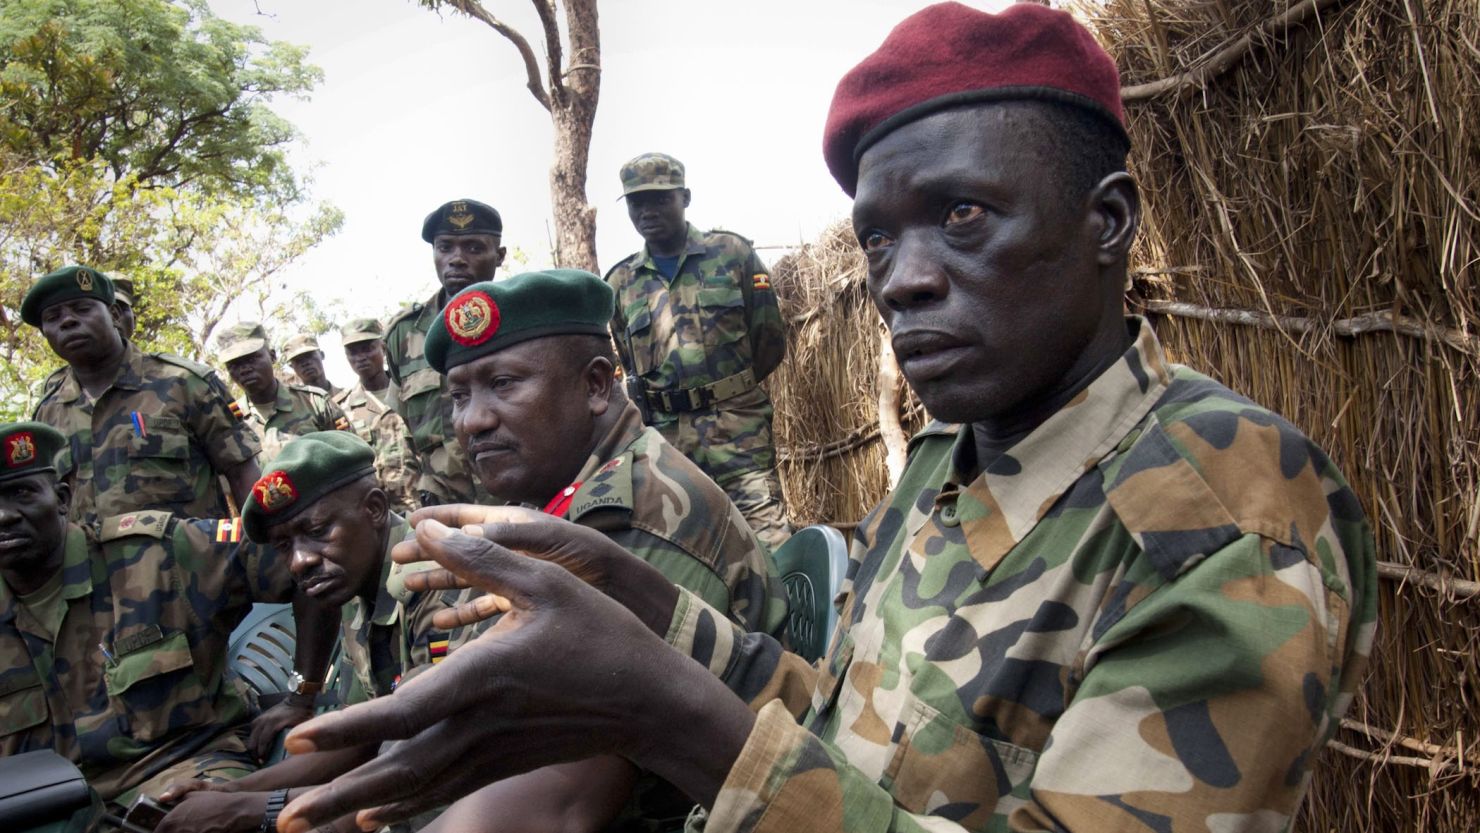 Ceasar Acellam, a senior member of the Lord's Resistance Army, at the Ugandan army base in Djema on May 13, 2012.